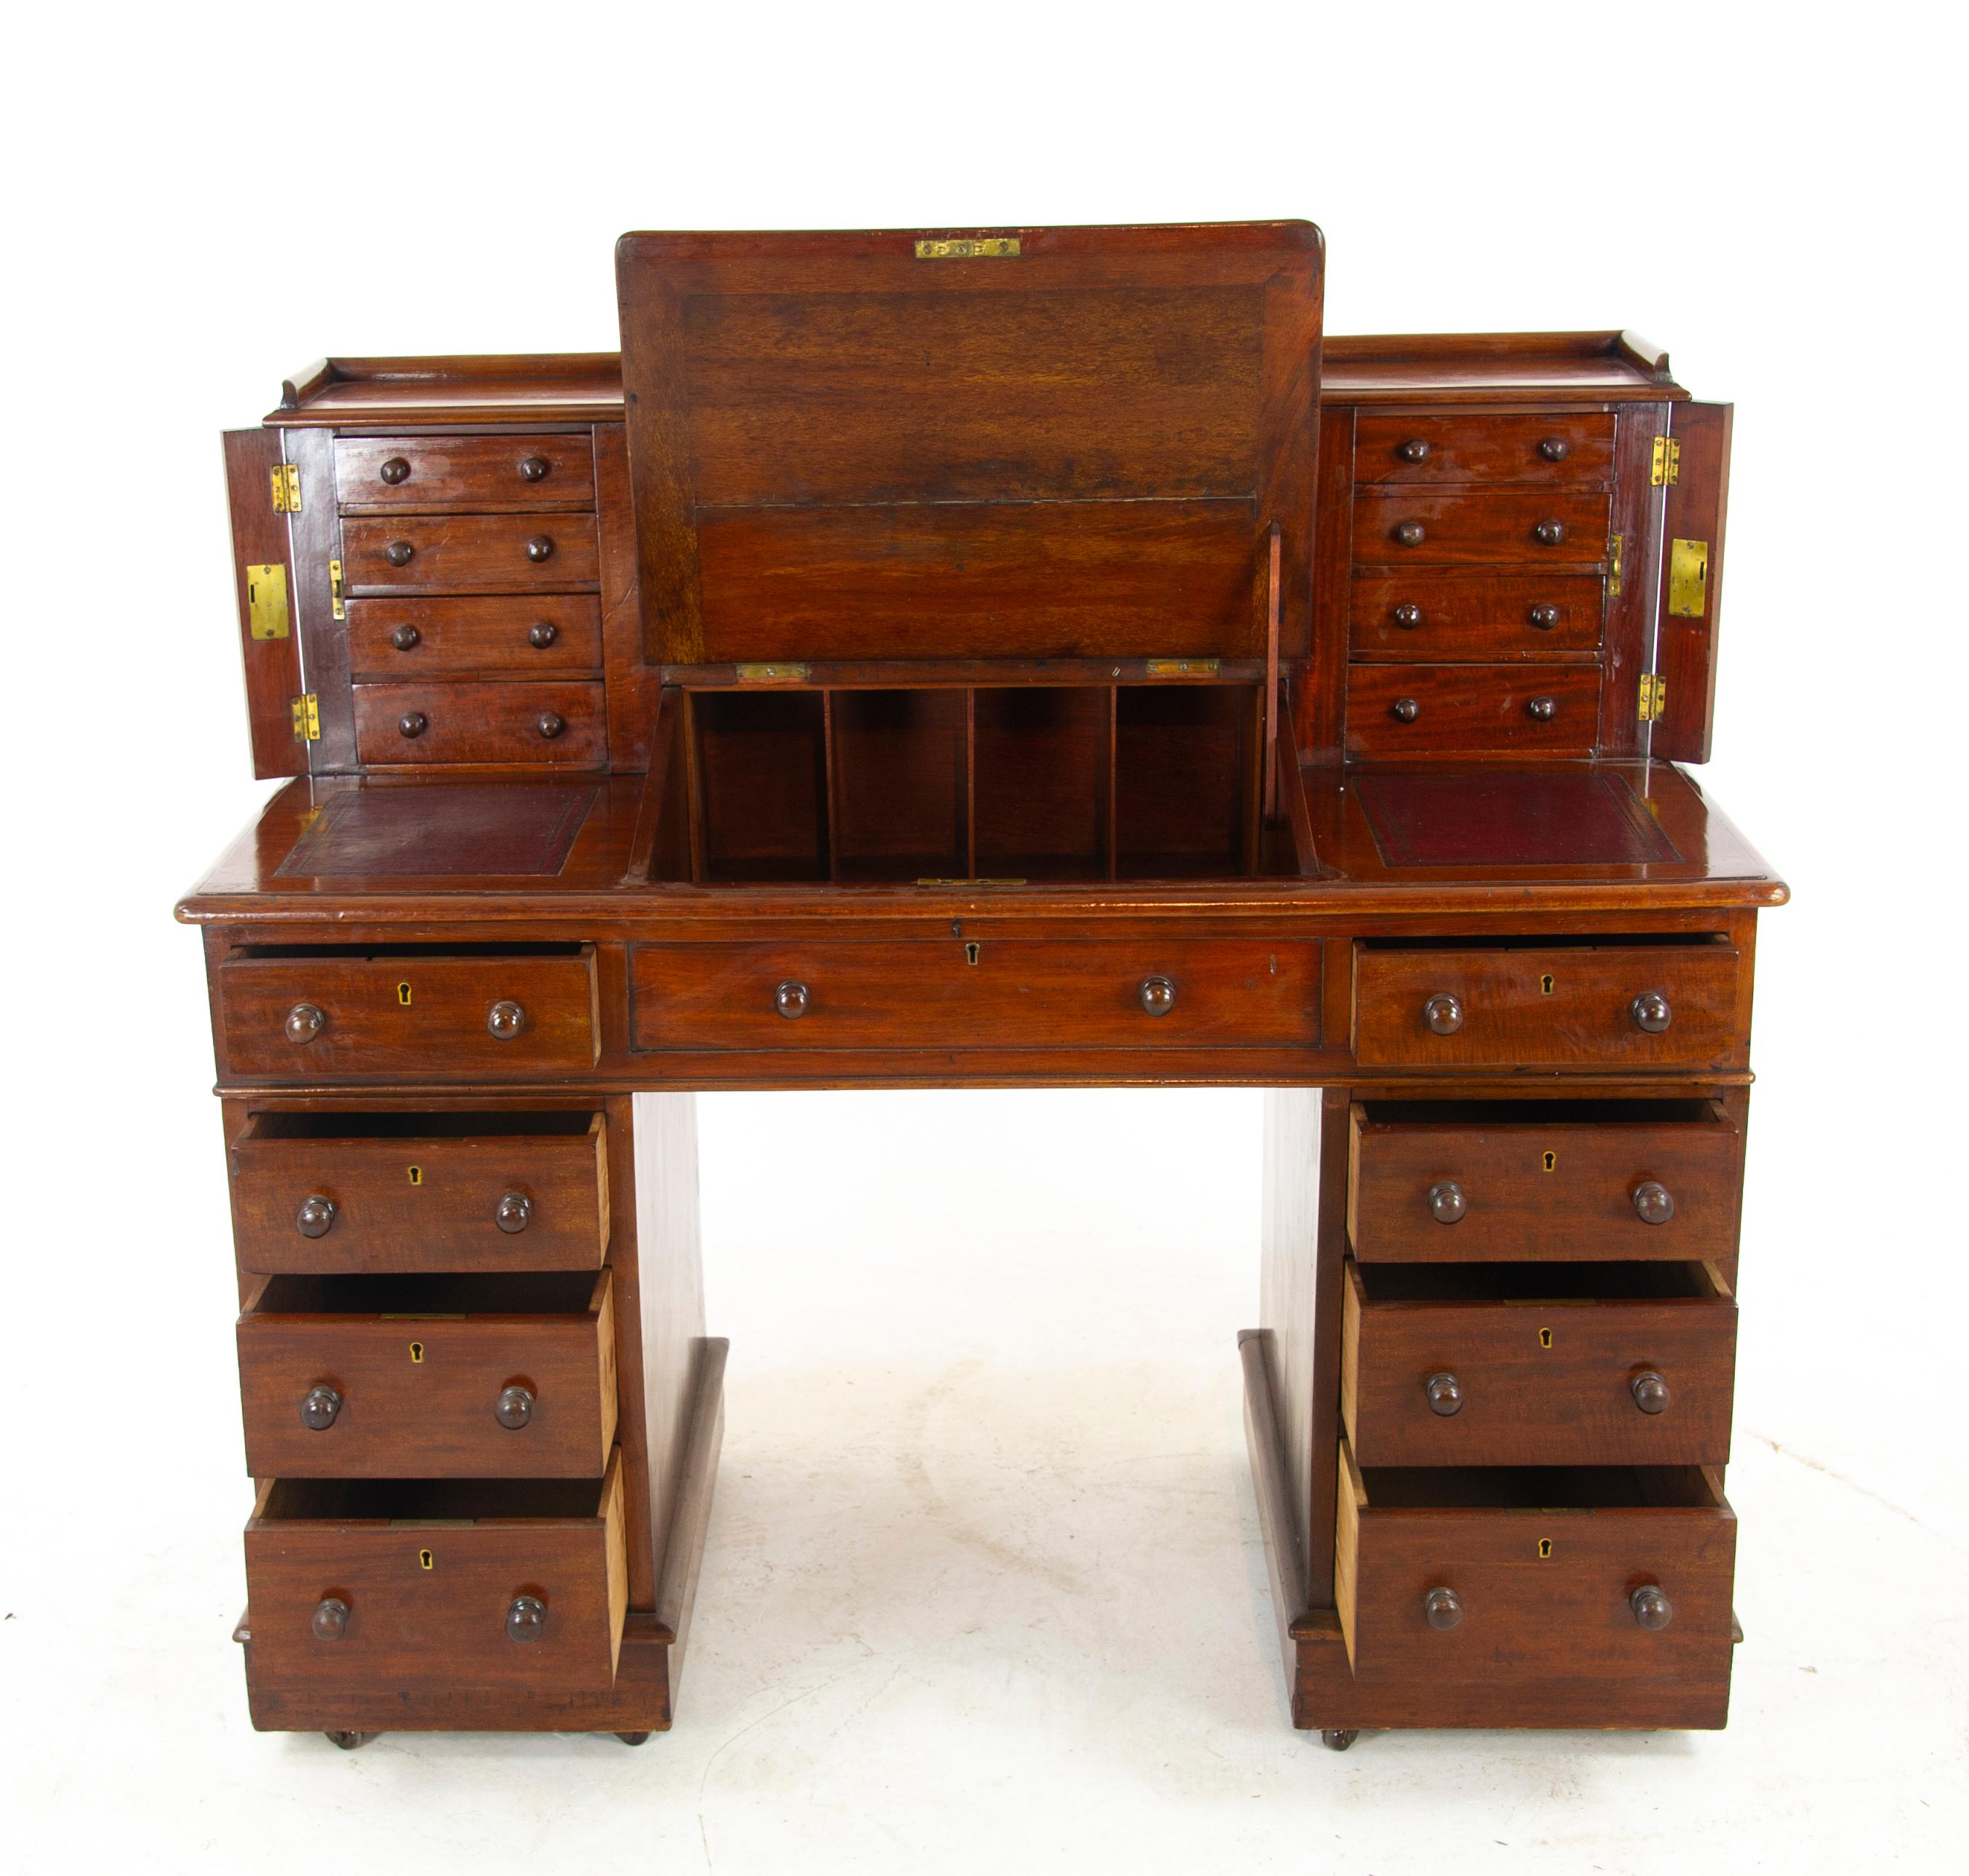 Walnut dickens desk, double pedestal desk, Victorian desk, Scotland 1880, Antique Furniture.

Scotland, 1880.
Top has two sets of four small galleried drawers
Side lockers
Leather writing surface on slanted lid below, raises to reveal storage